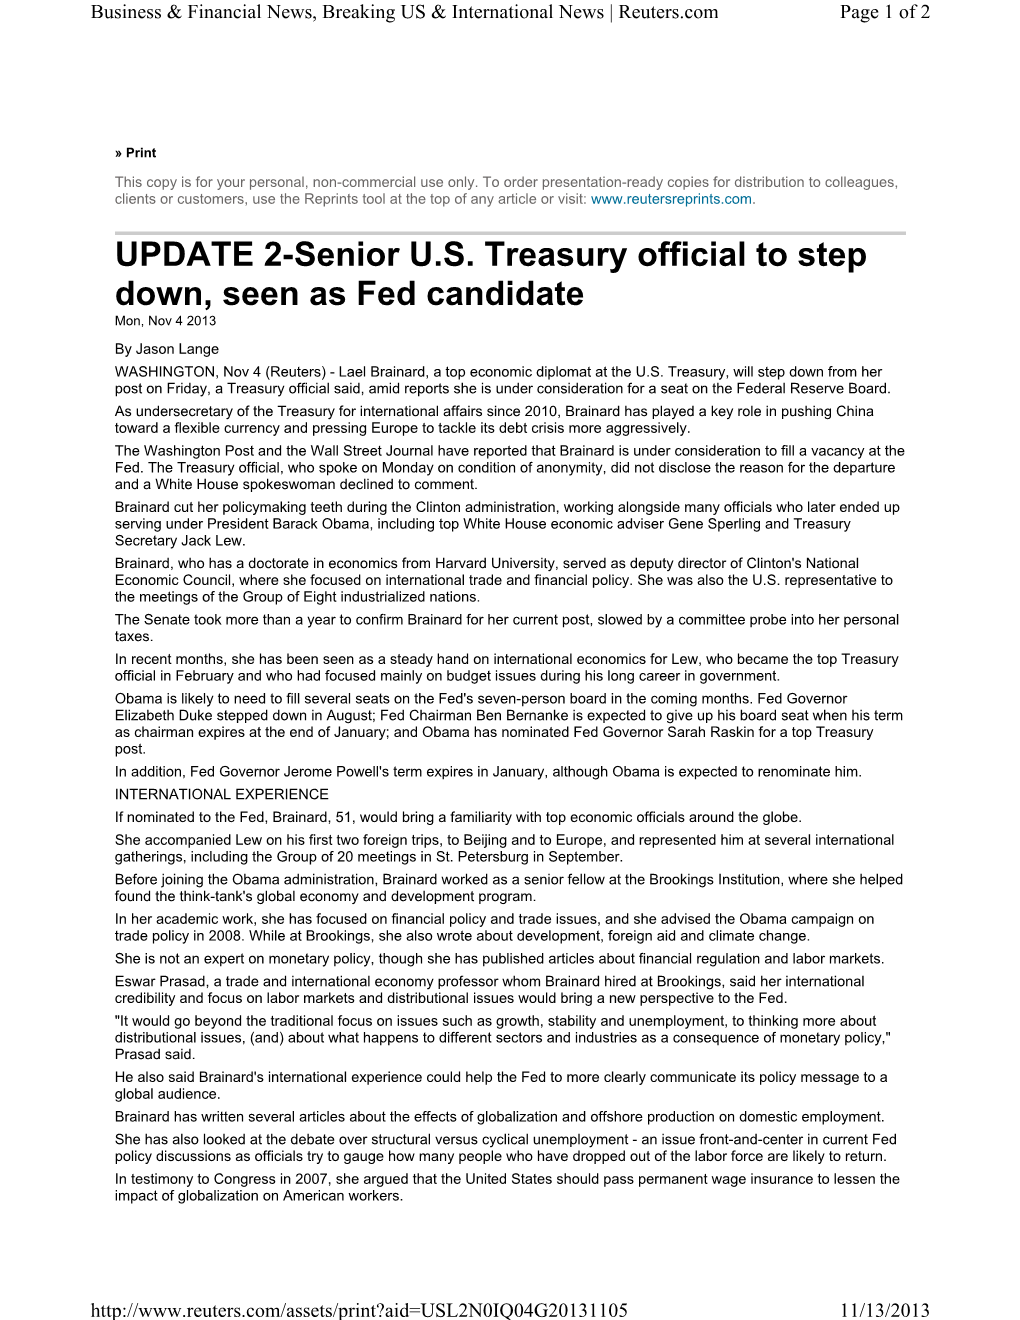 UPDATE 2-Senior U.S. Treasury Official to Step Down, Seen As Fed